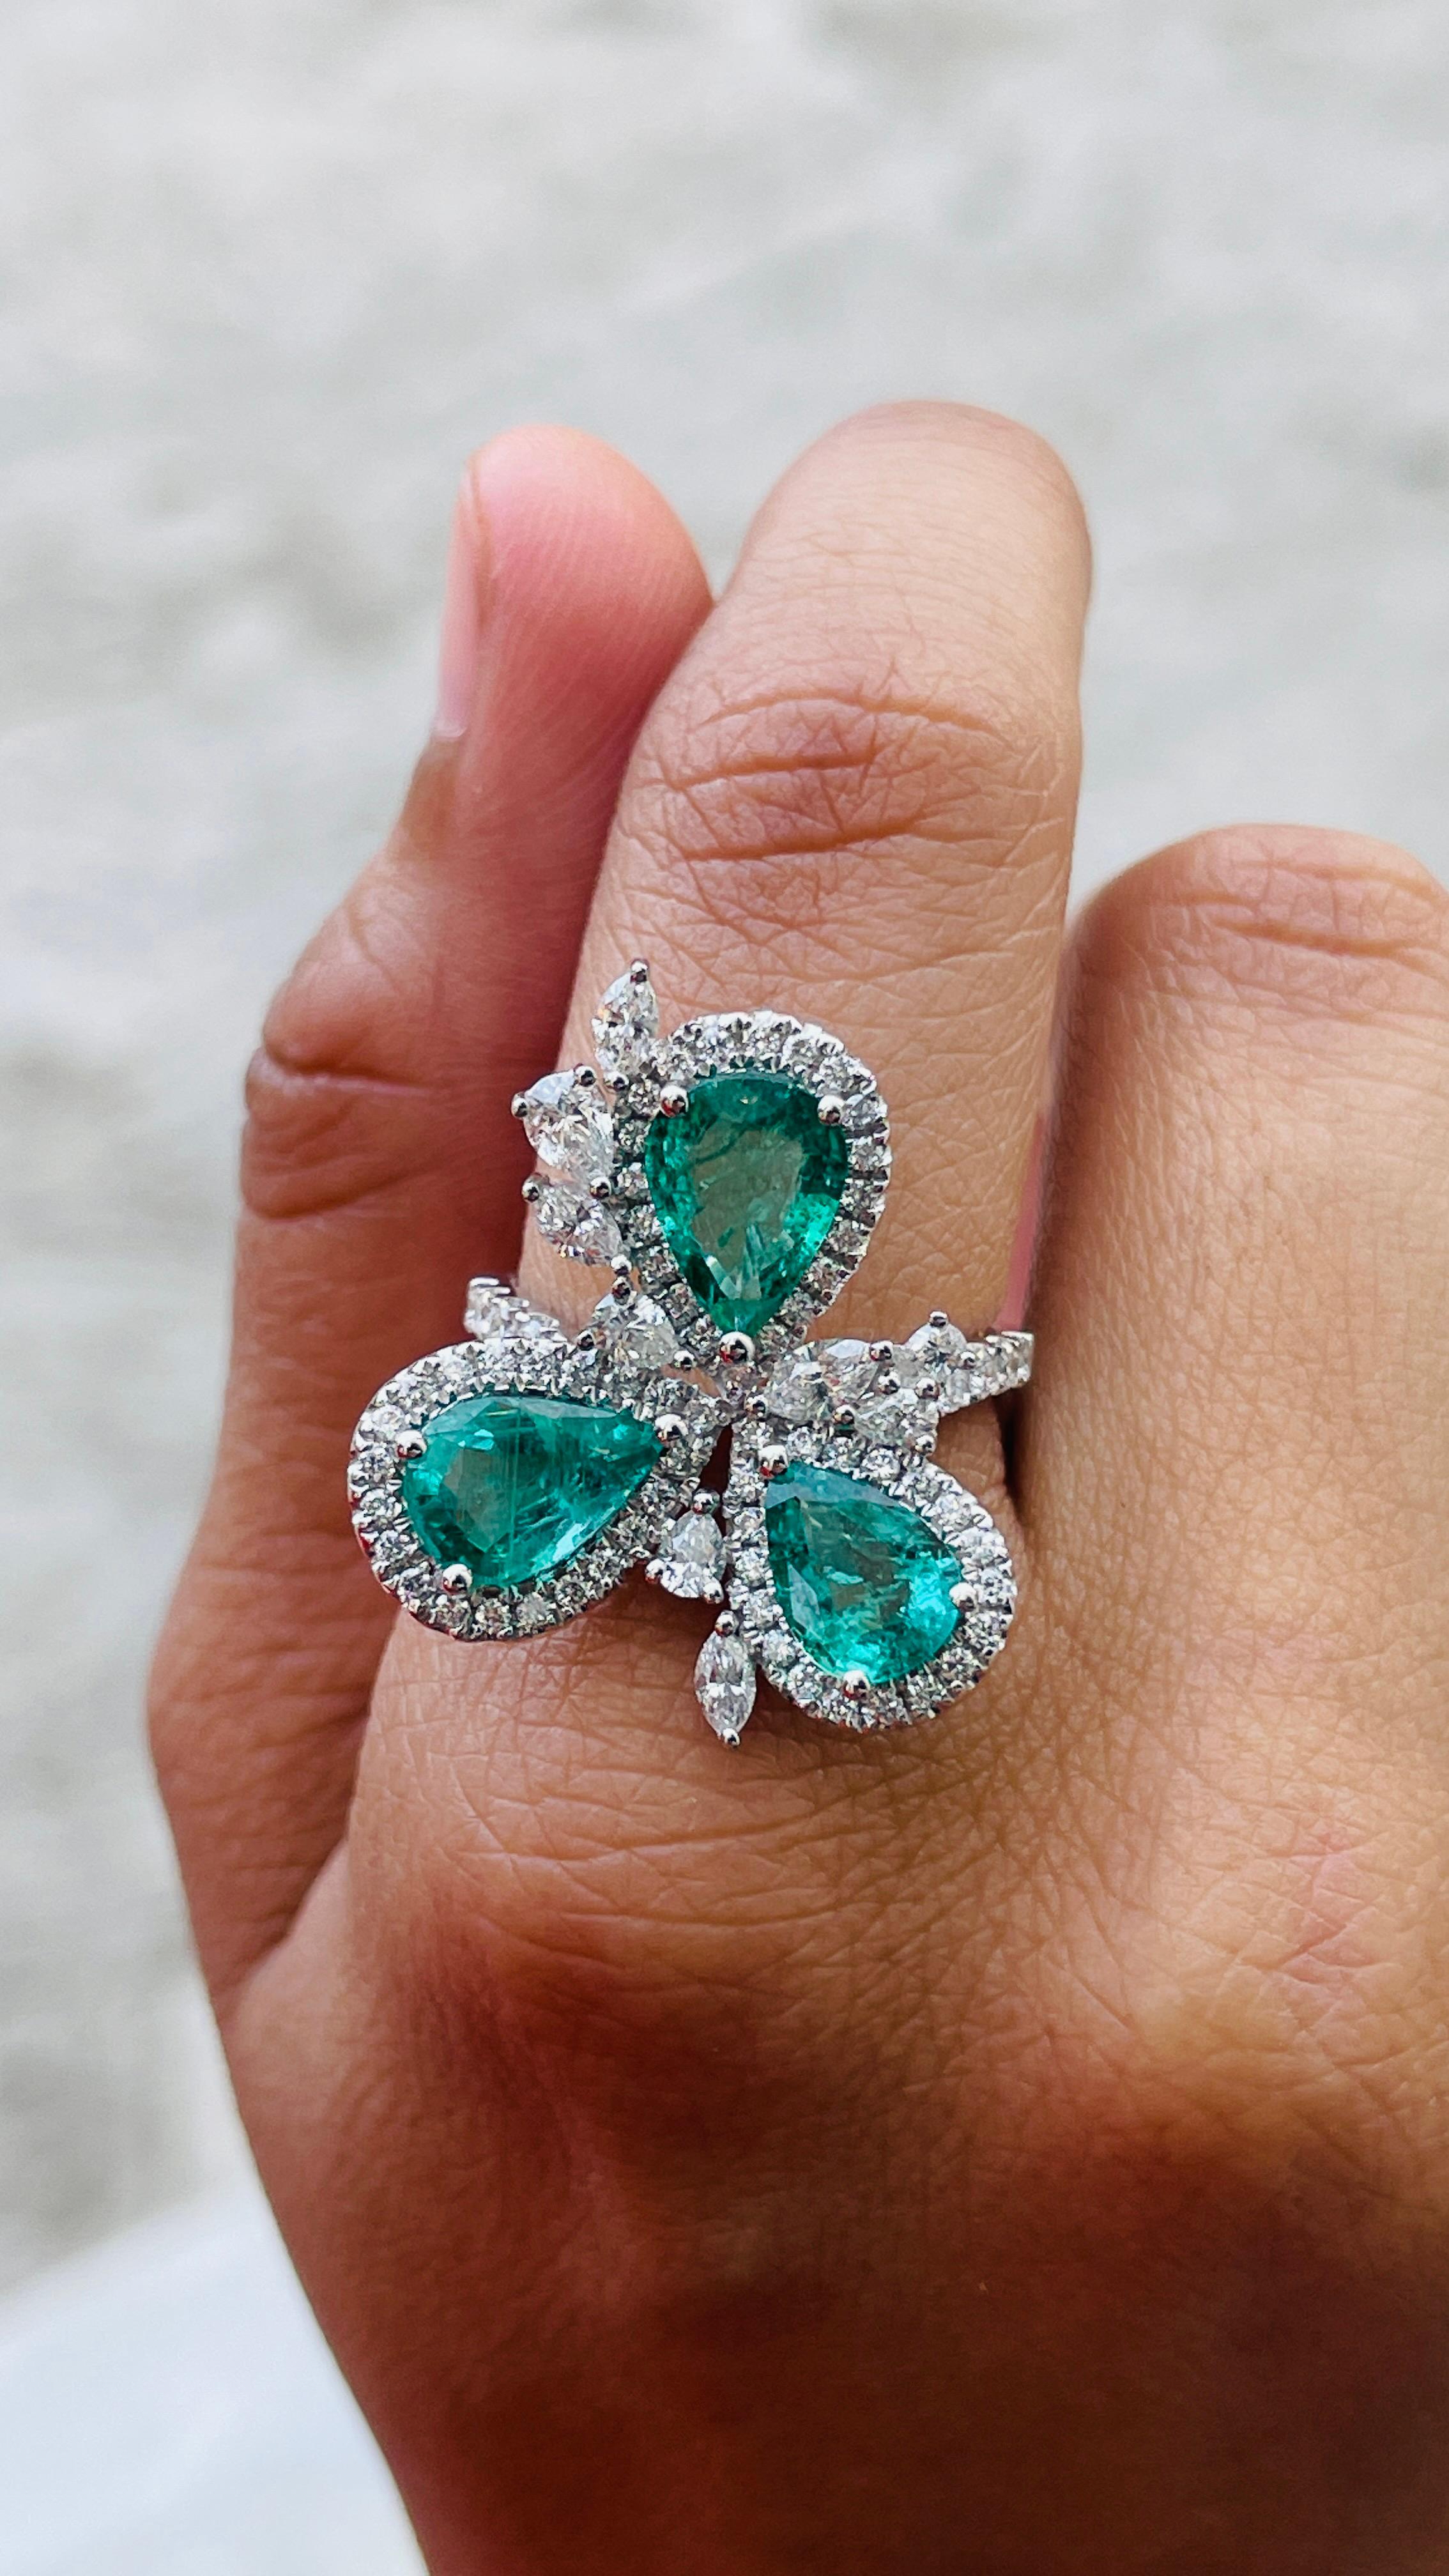 For Sale:  Magnificent 3.32 ct Emerald Cocktail Ring in 14K White Gold with Diamonds 4